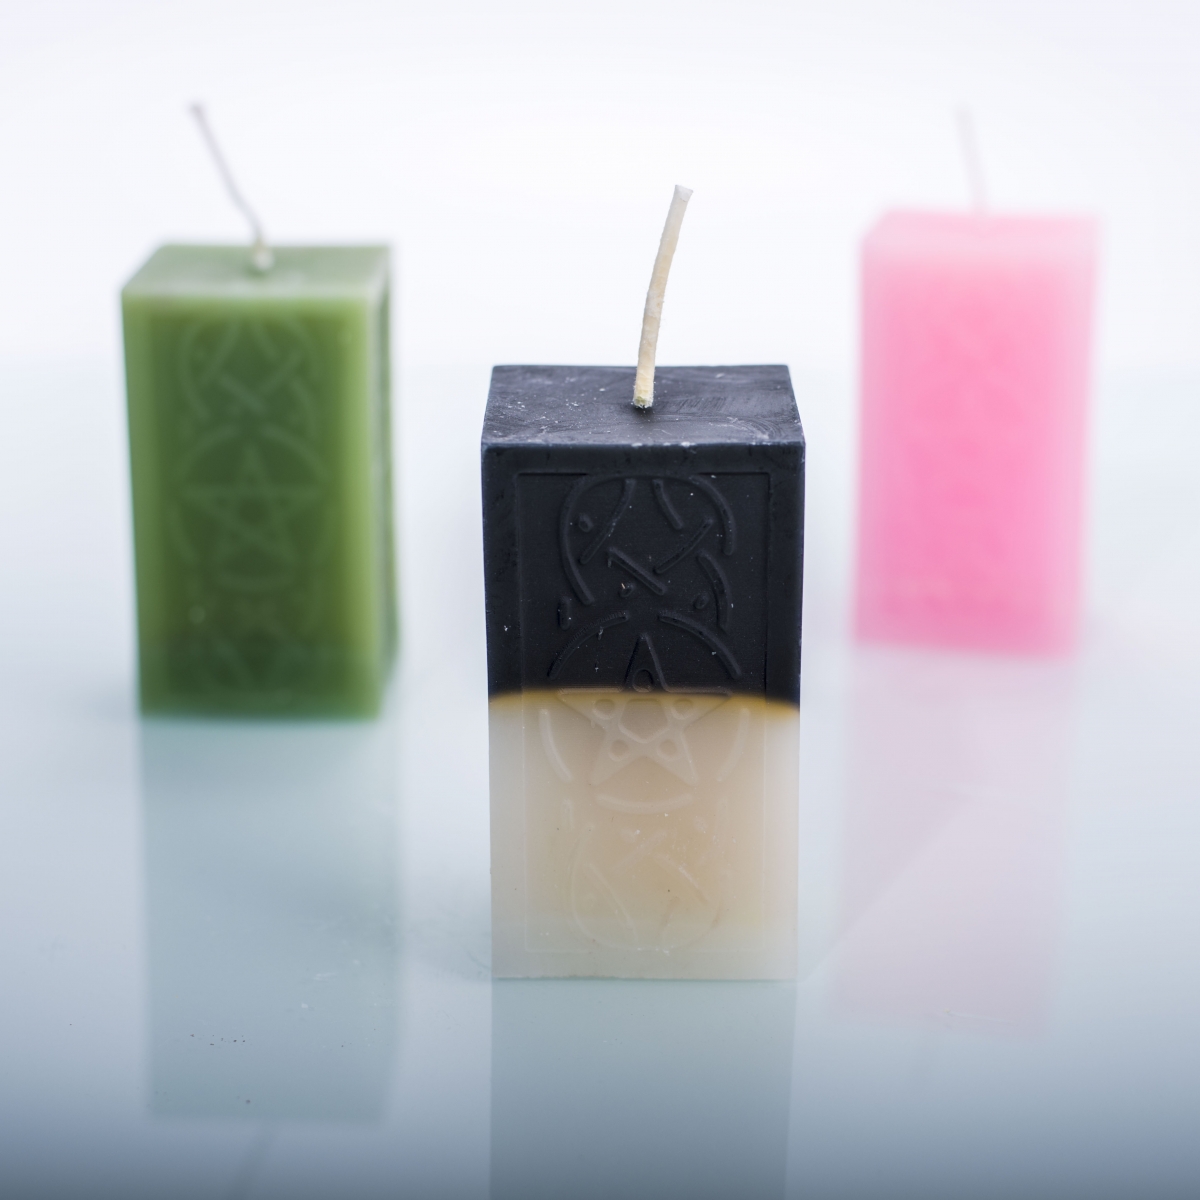 Ritual Candles :Cube Candle , Carved Witchcraft LOGO ,White Black Gradient Color ,China Factory ,Wholesale Price-HOWCANDLE-Candles,Scented Candles,Aromatherapy Candles,Soy Candles,Vegan Candles,Jar Candles,Pillar Candles,Candle Gift Sets,Essential Oils,Reed Diffuser,Candle Holder,